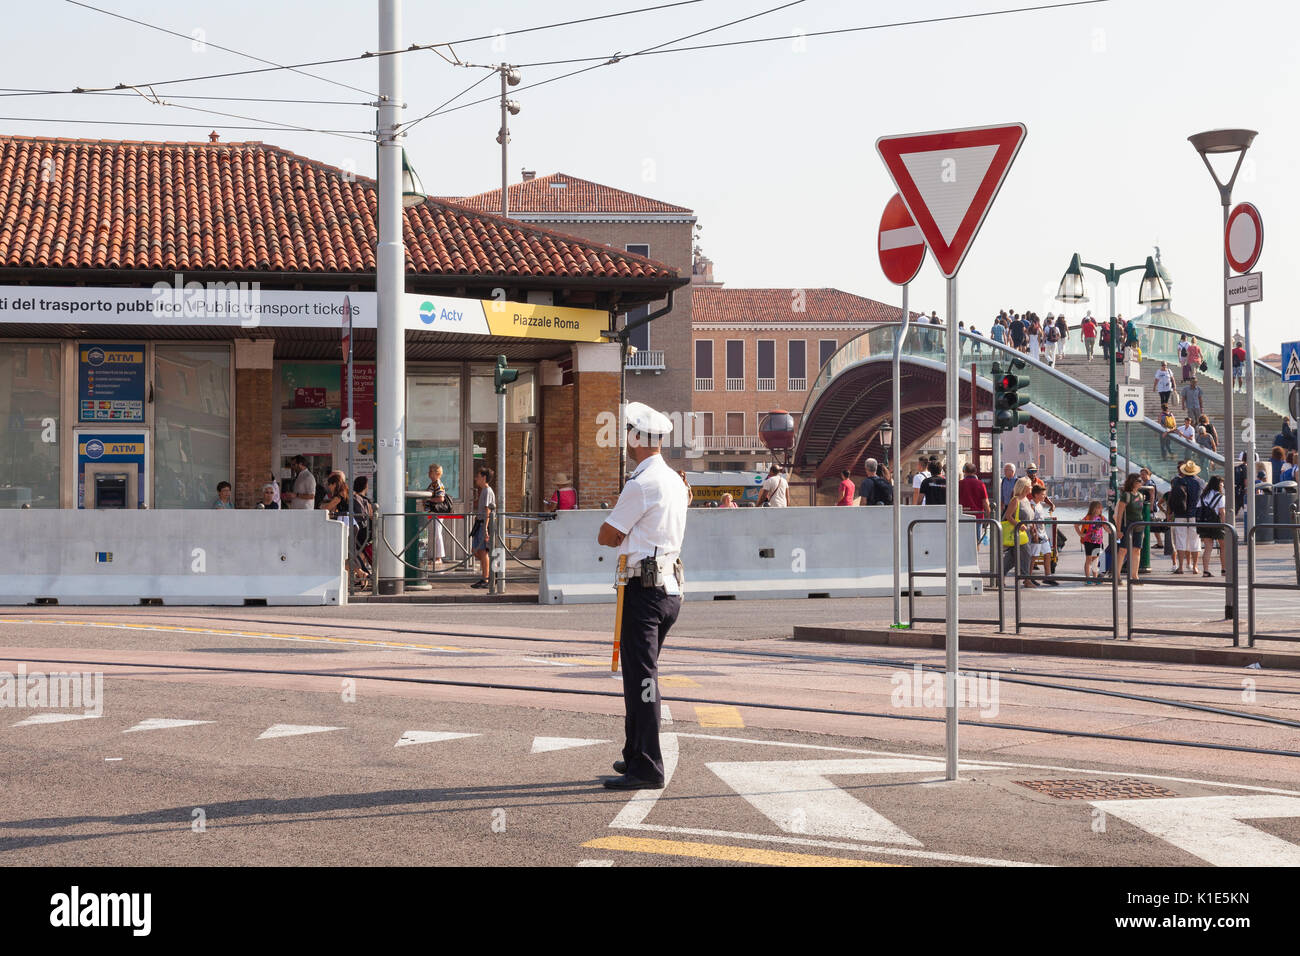 Venice, Italy. 26th Aug, 2017. Anti-terror preparations for the 2017 Venice Film Festival due to start on the 30 August. Overnight the first of the concrete barriers have been installed in the Piazzale Roma to protect pedestrians and the tram lines from vehicular terror attacks. Traffic or security officer on duty in front of barrier and ticket office. Credit: Mary Clarke/Alamy Live News Stock Photo